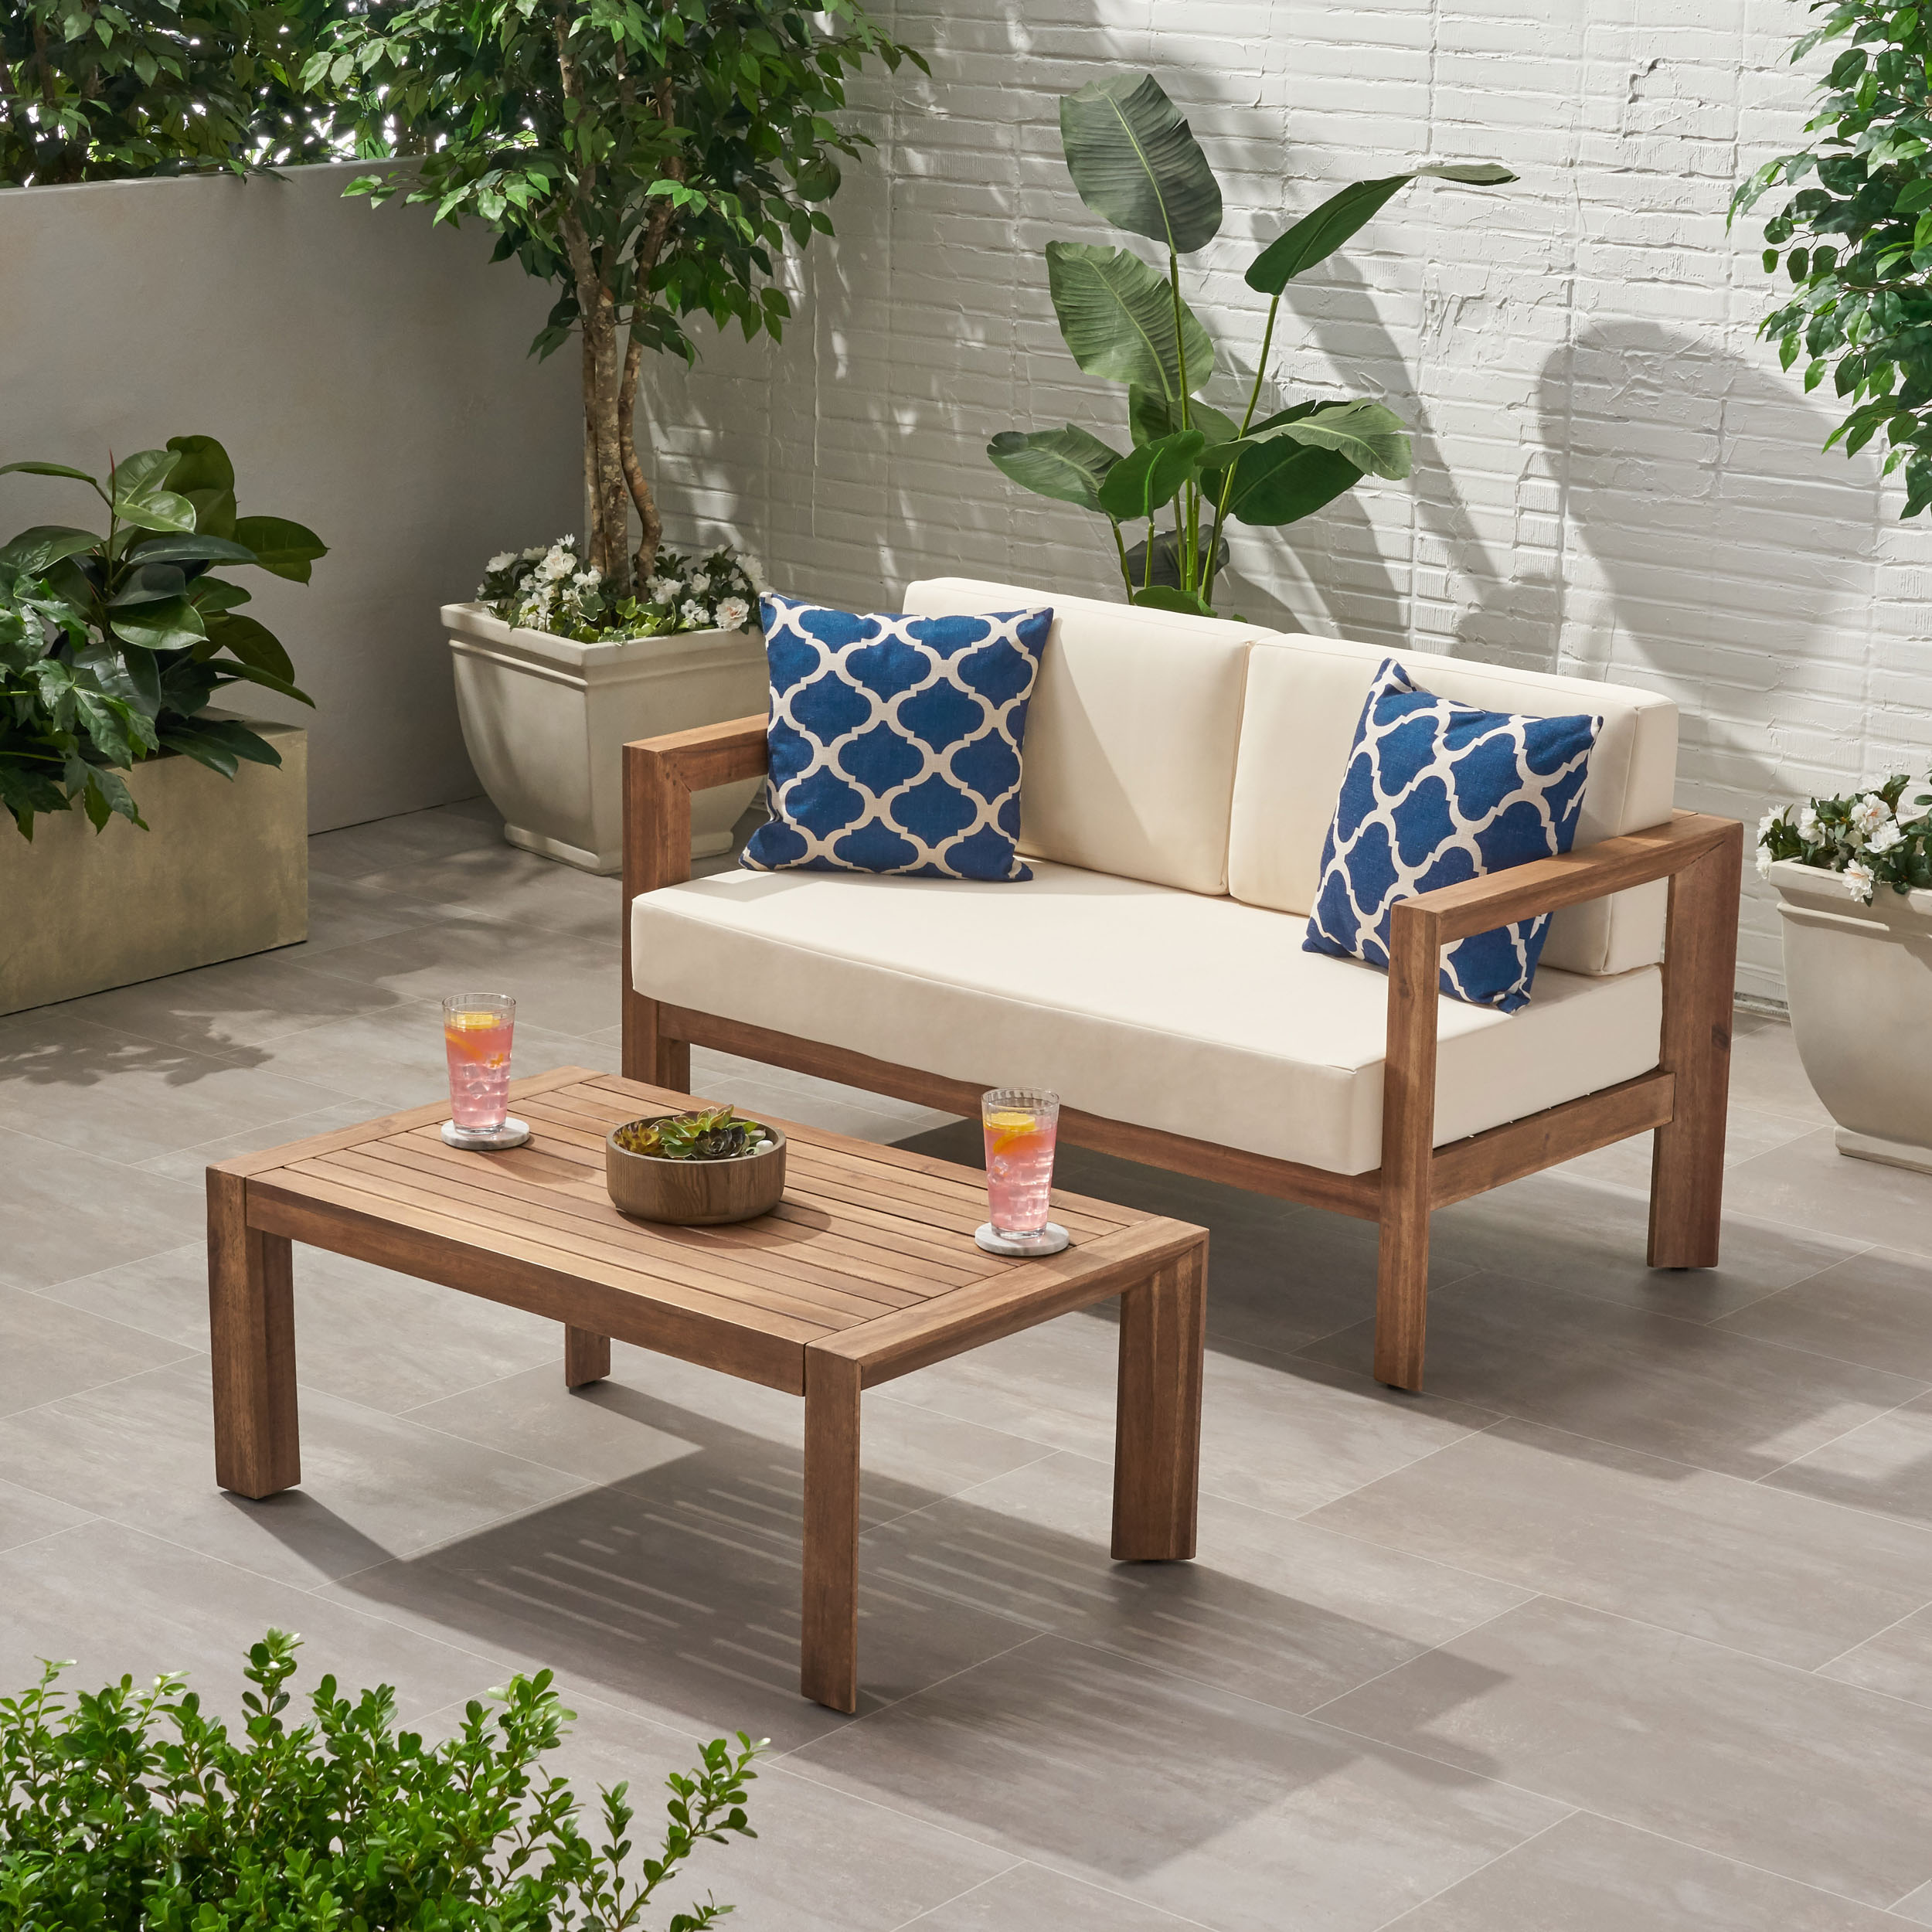 Noble House Genser Outdoor Wood Loveseat and Coffee Table in Beige - image 1 of 10